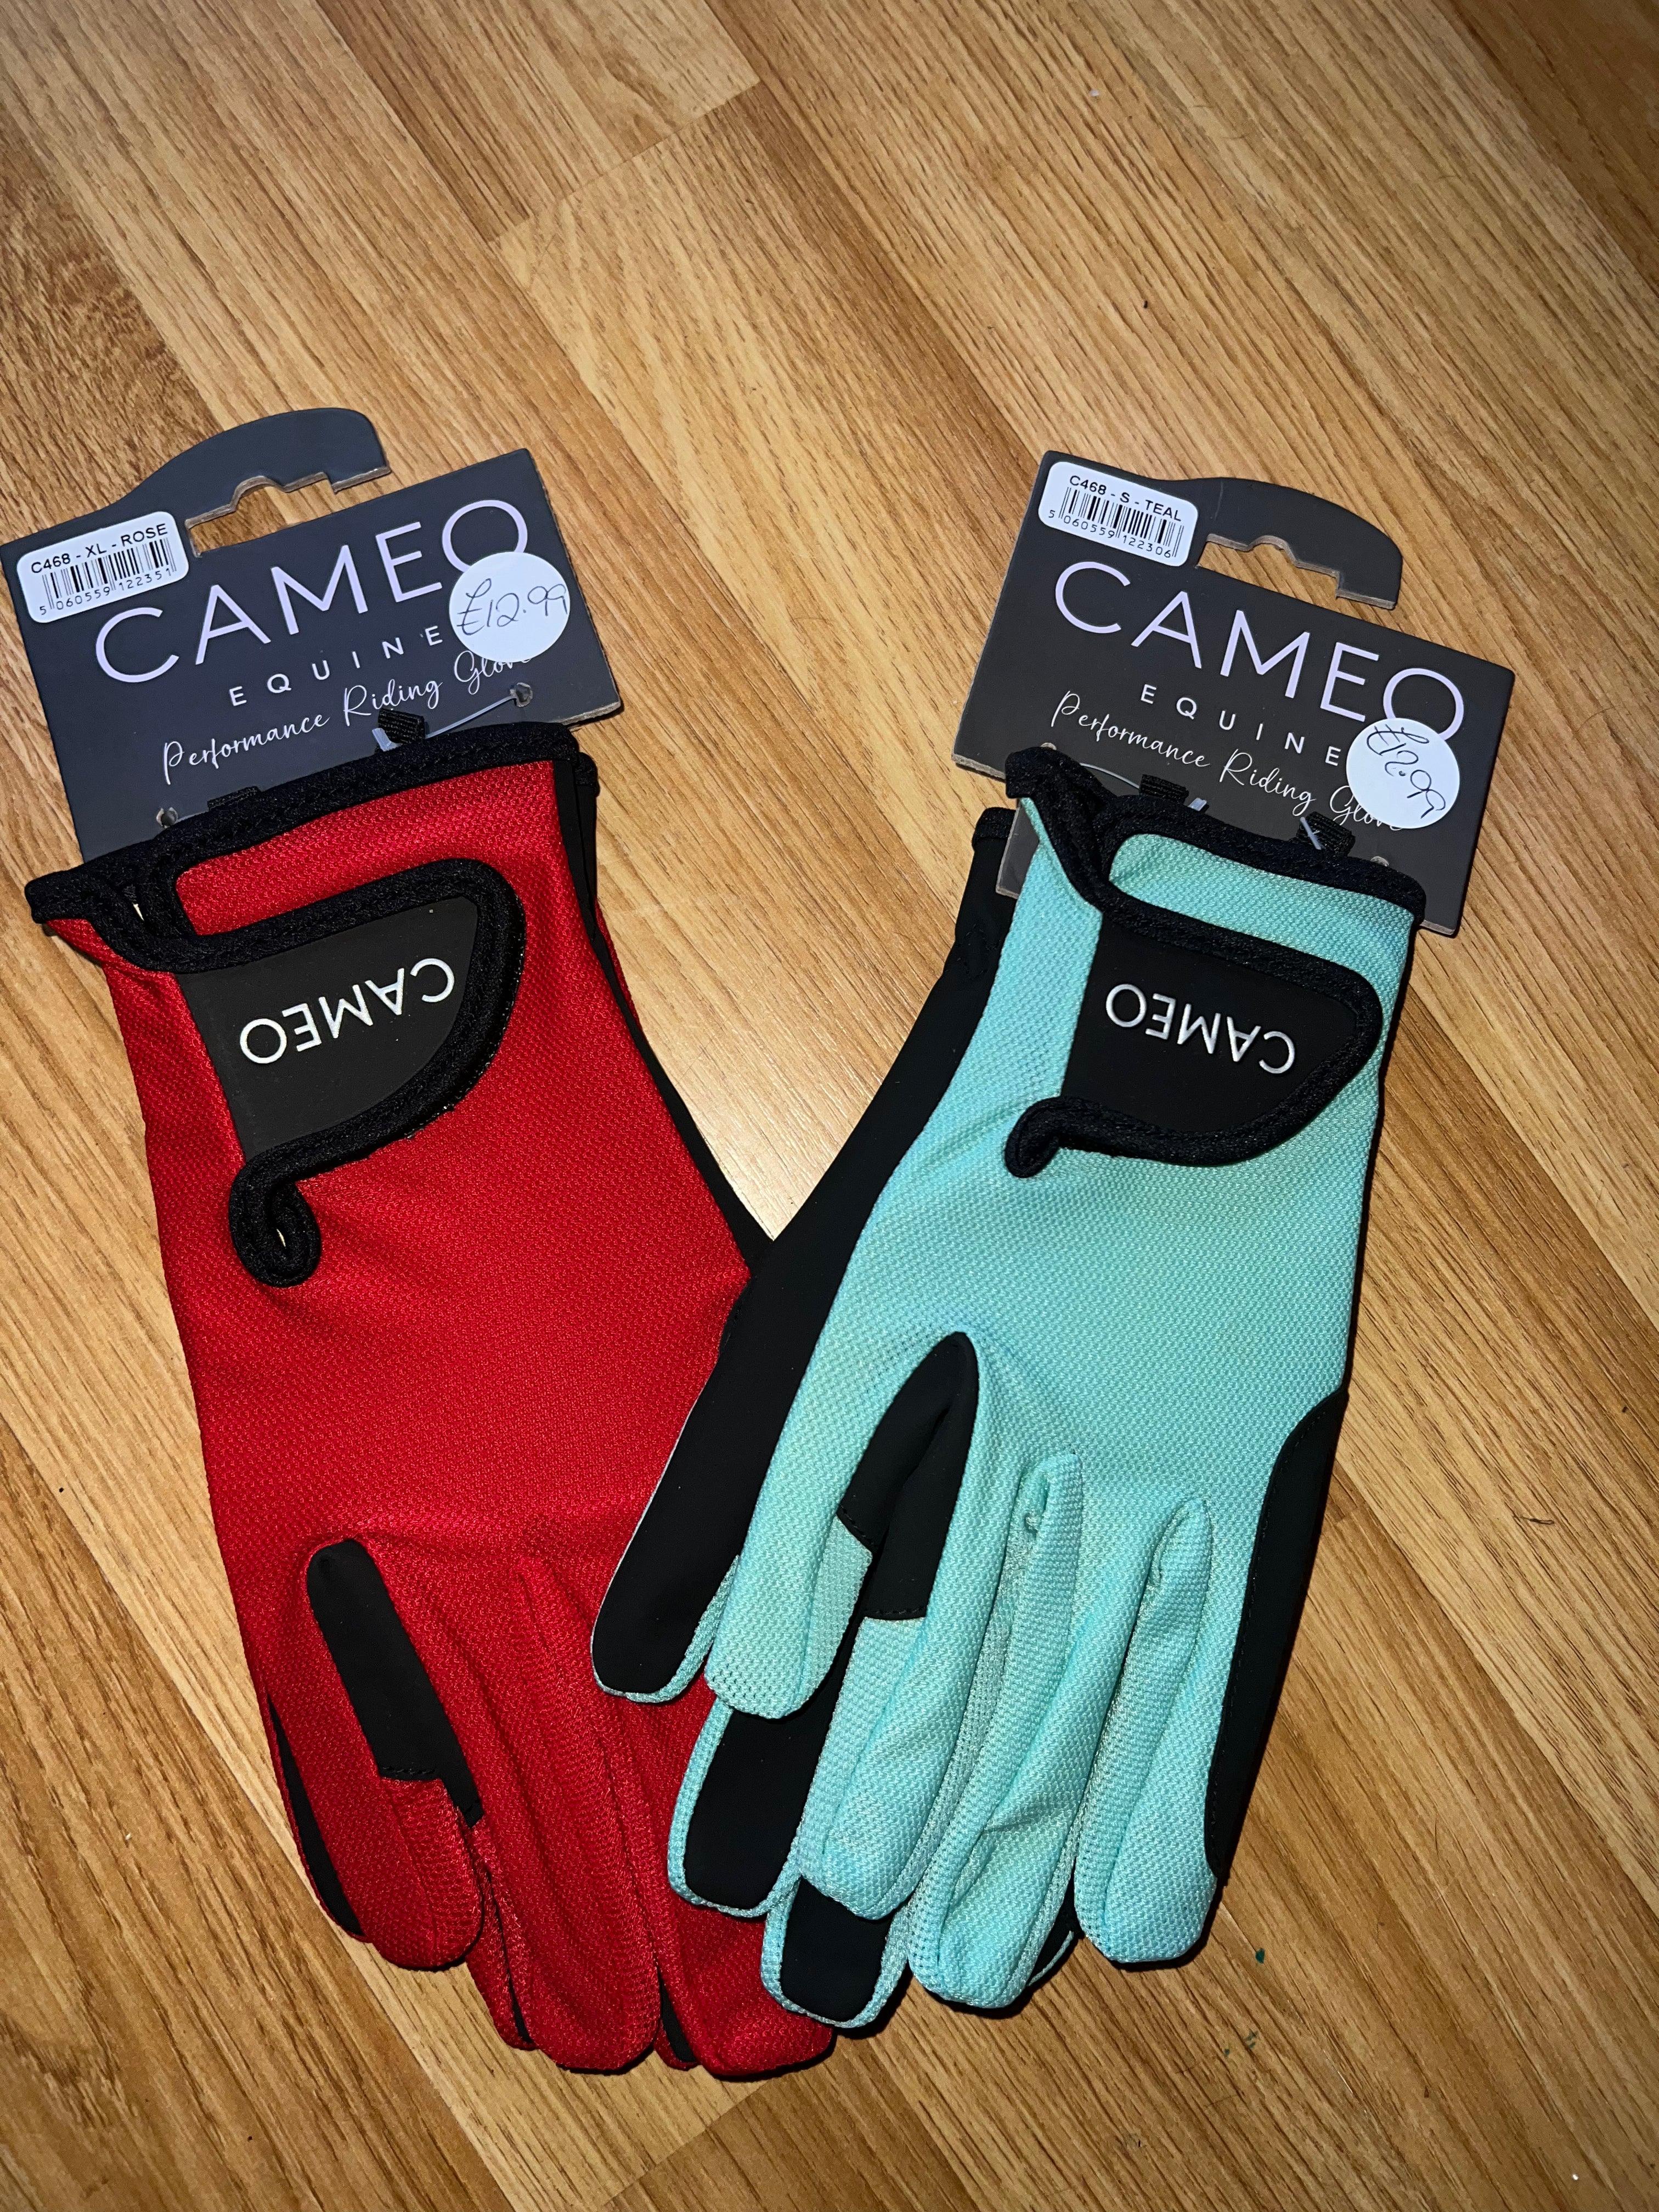 Cameo Performance Riding Gloves - Kids & Adults